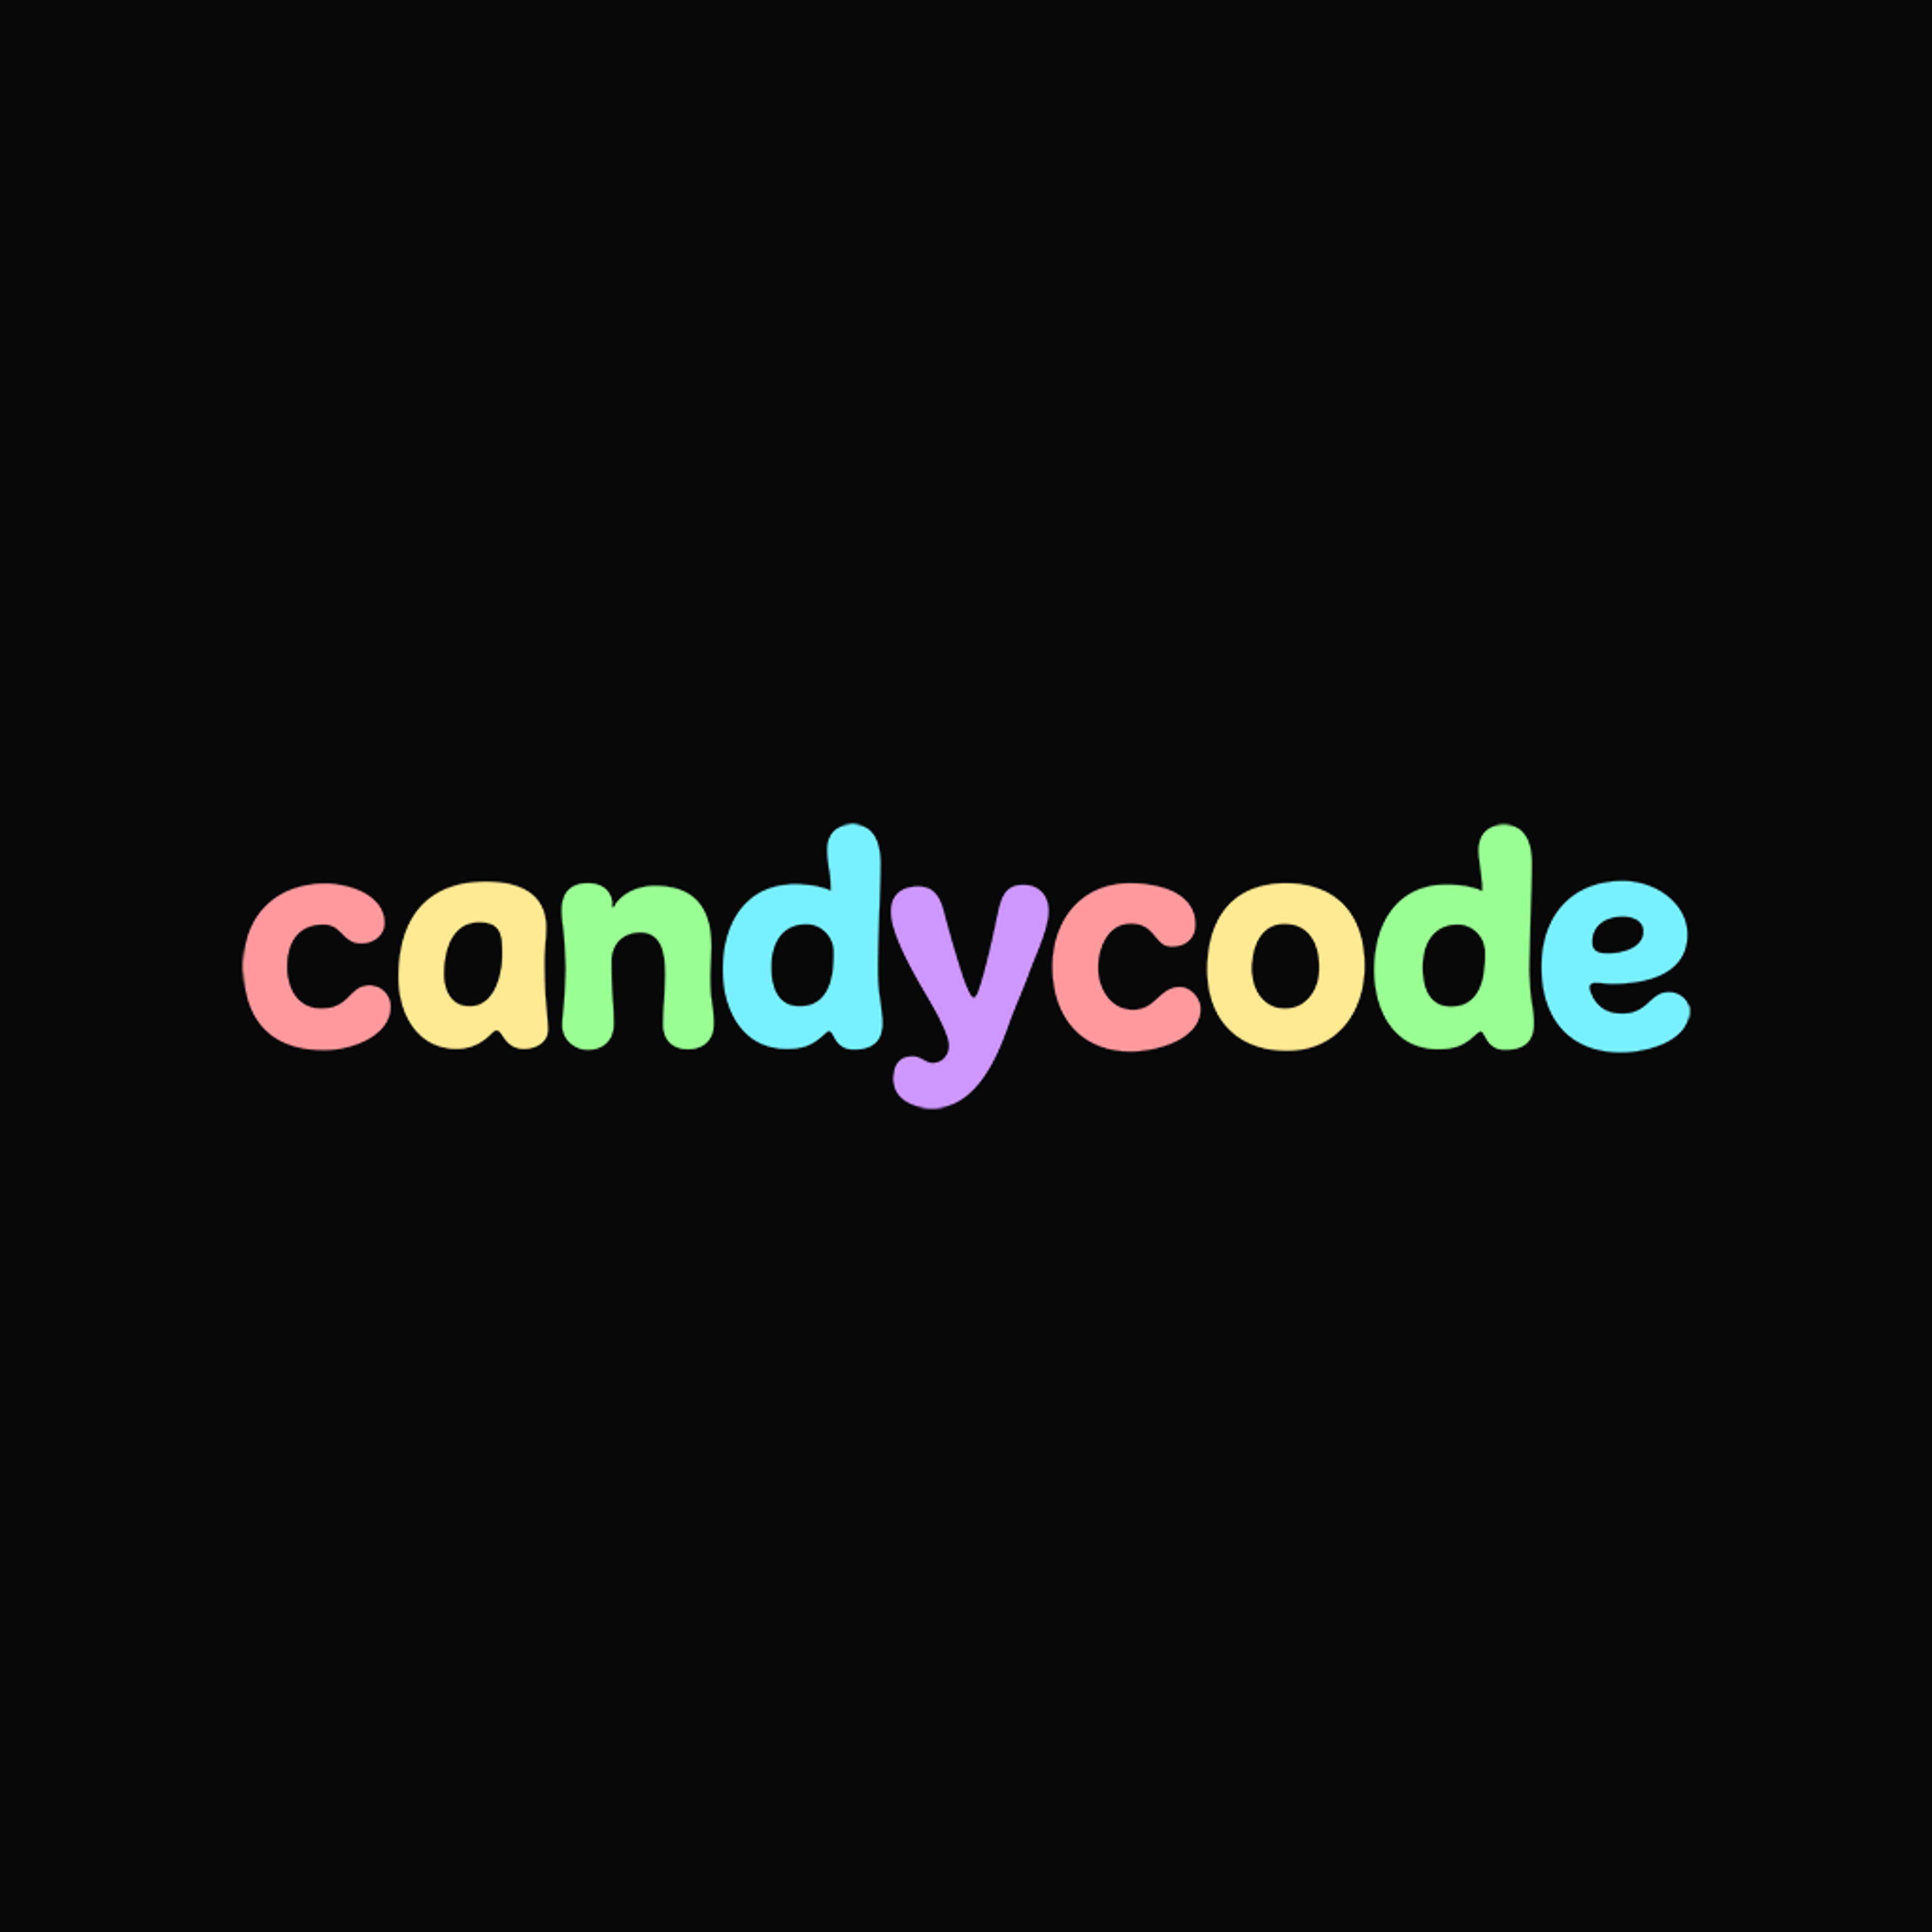 candycode